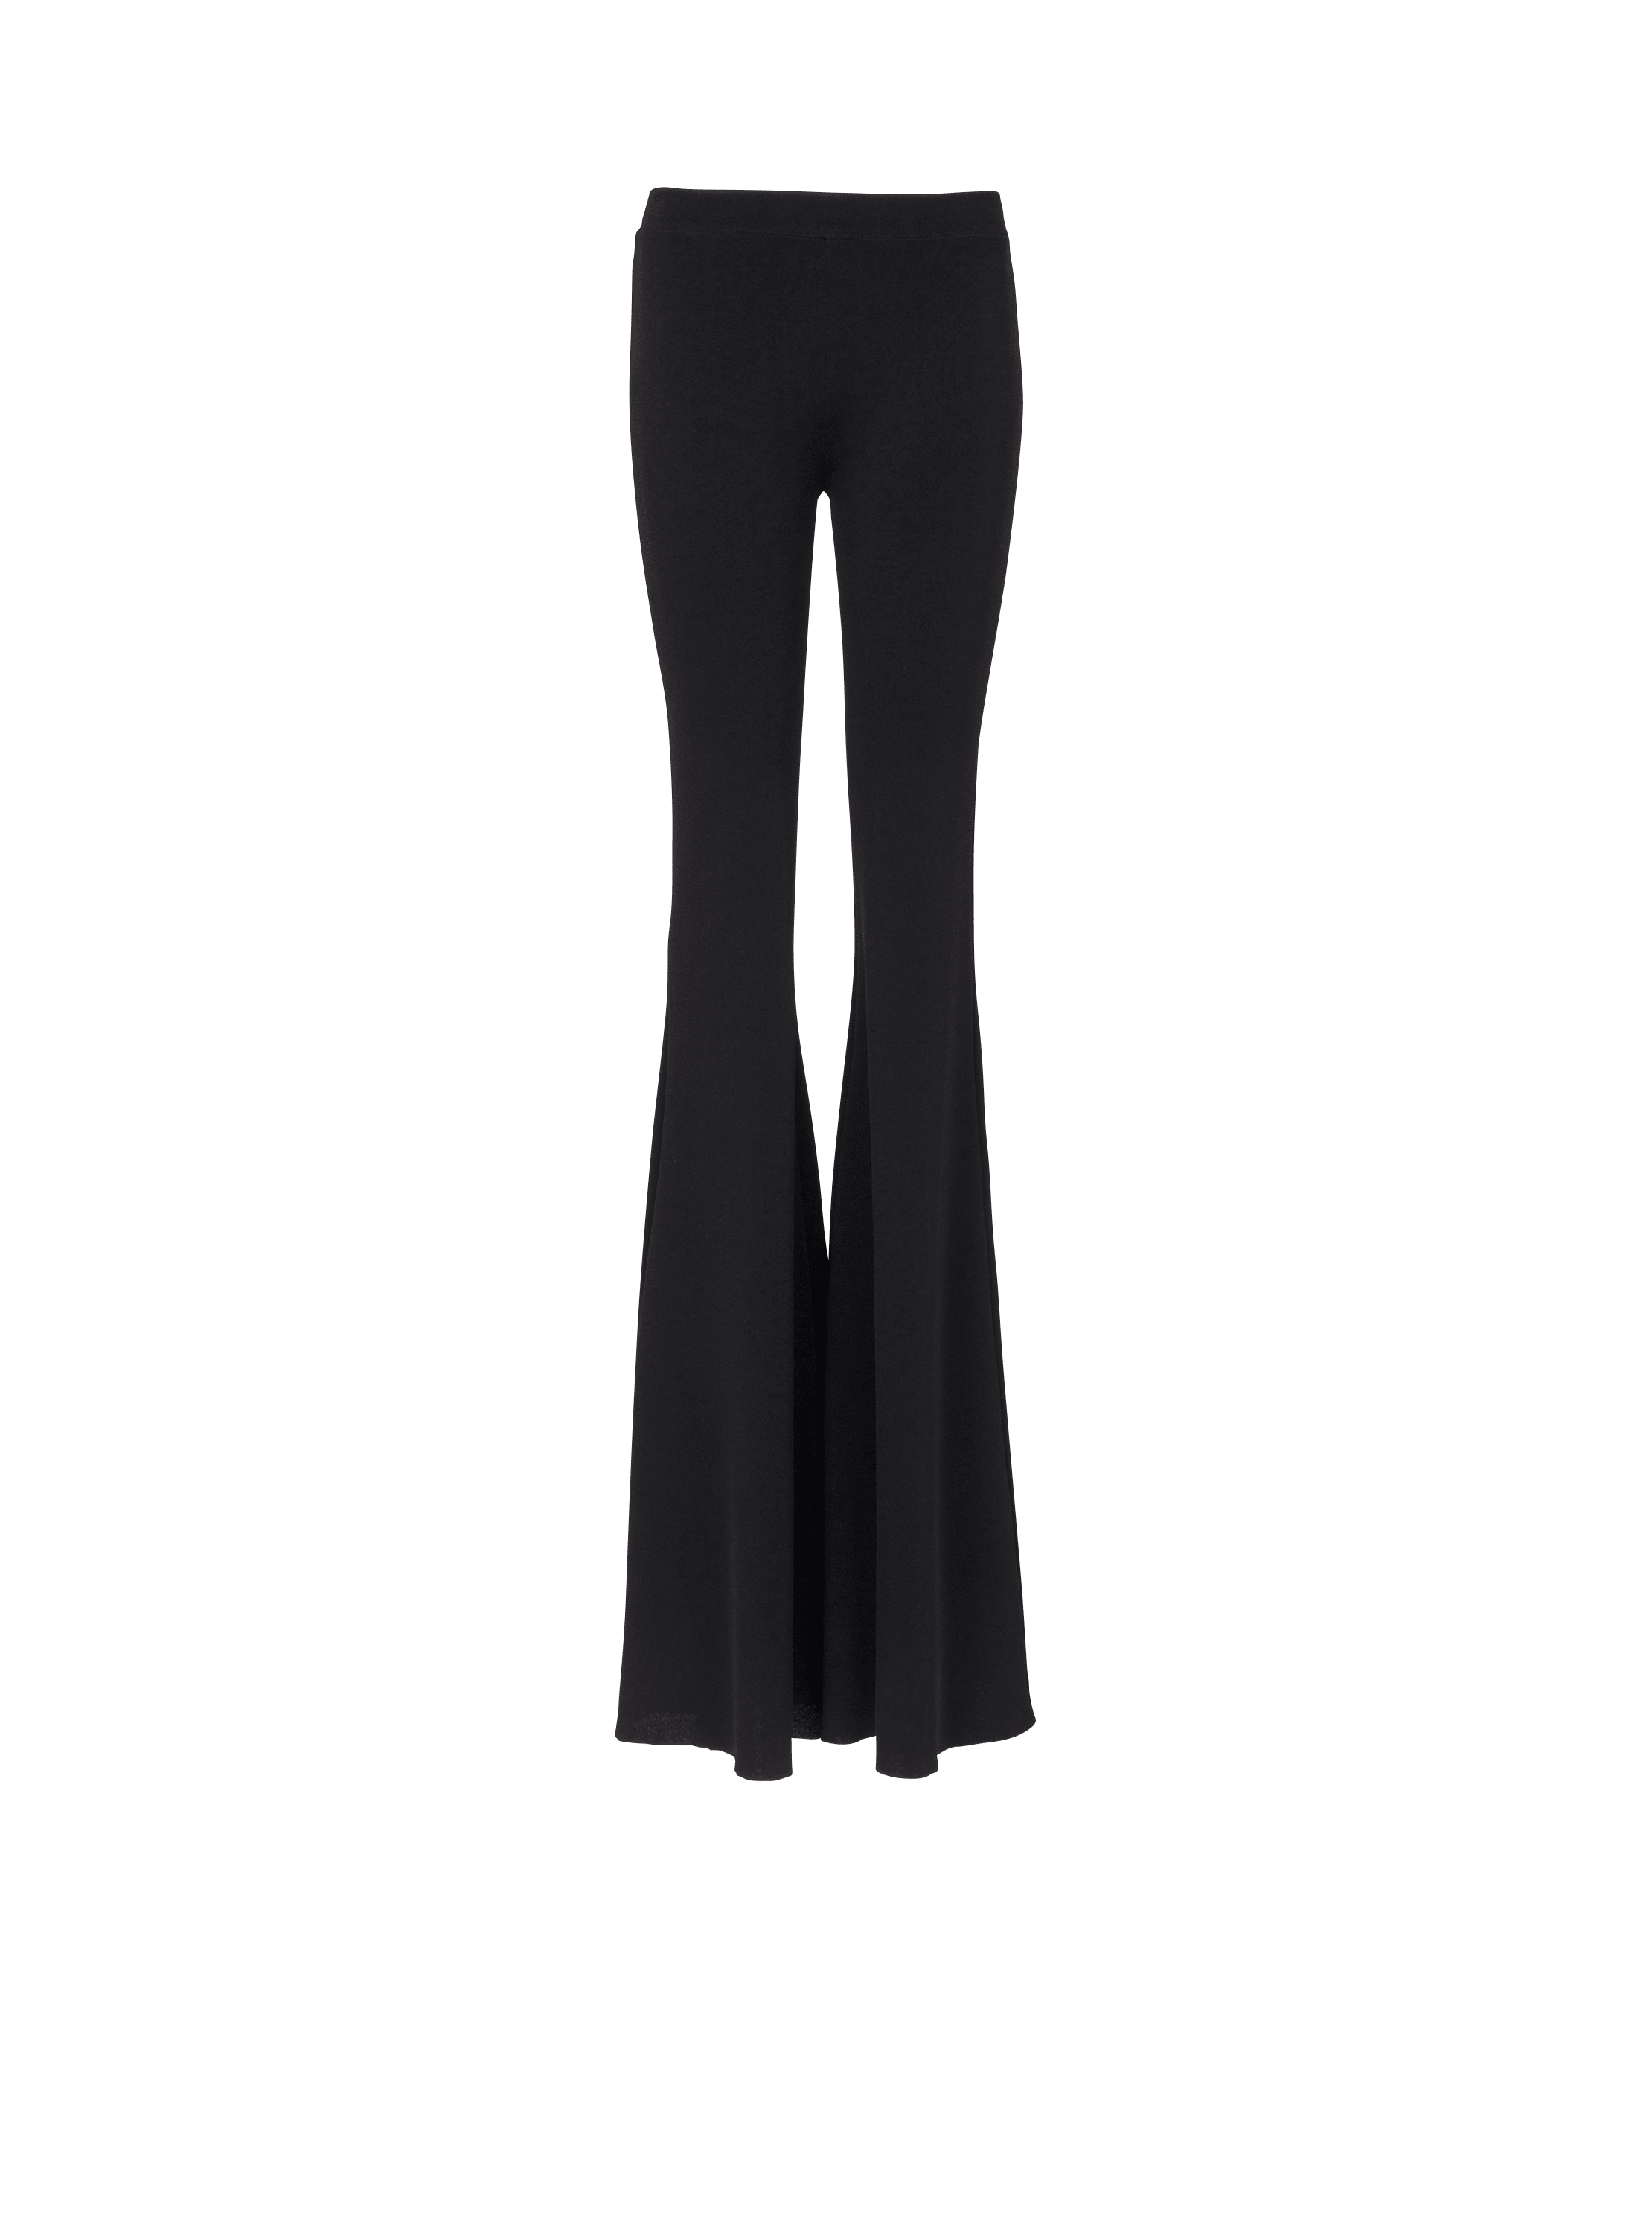 Small Changes Flare Yoga Pants in Black – Ivory Gem